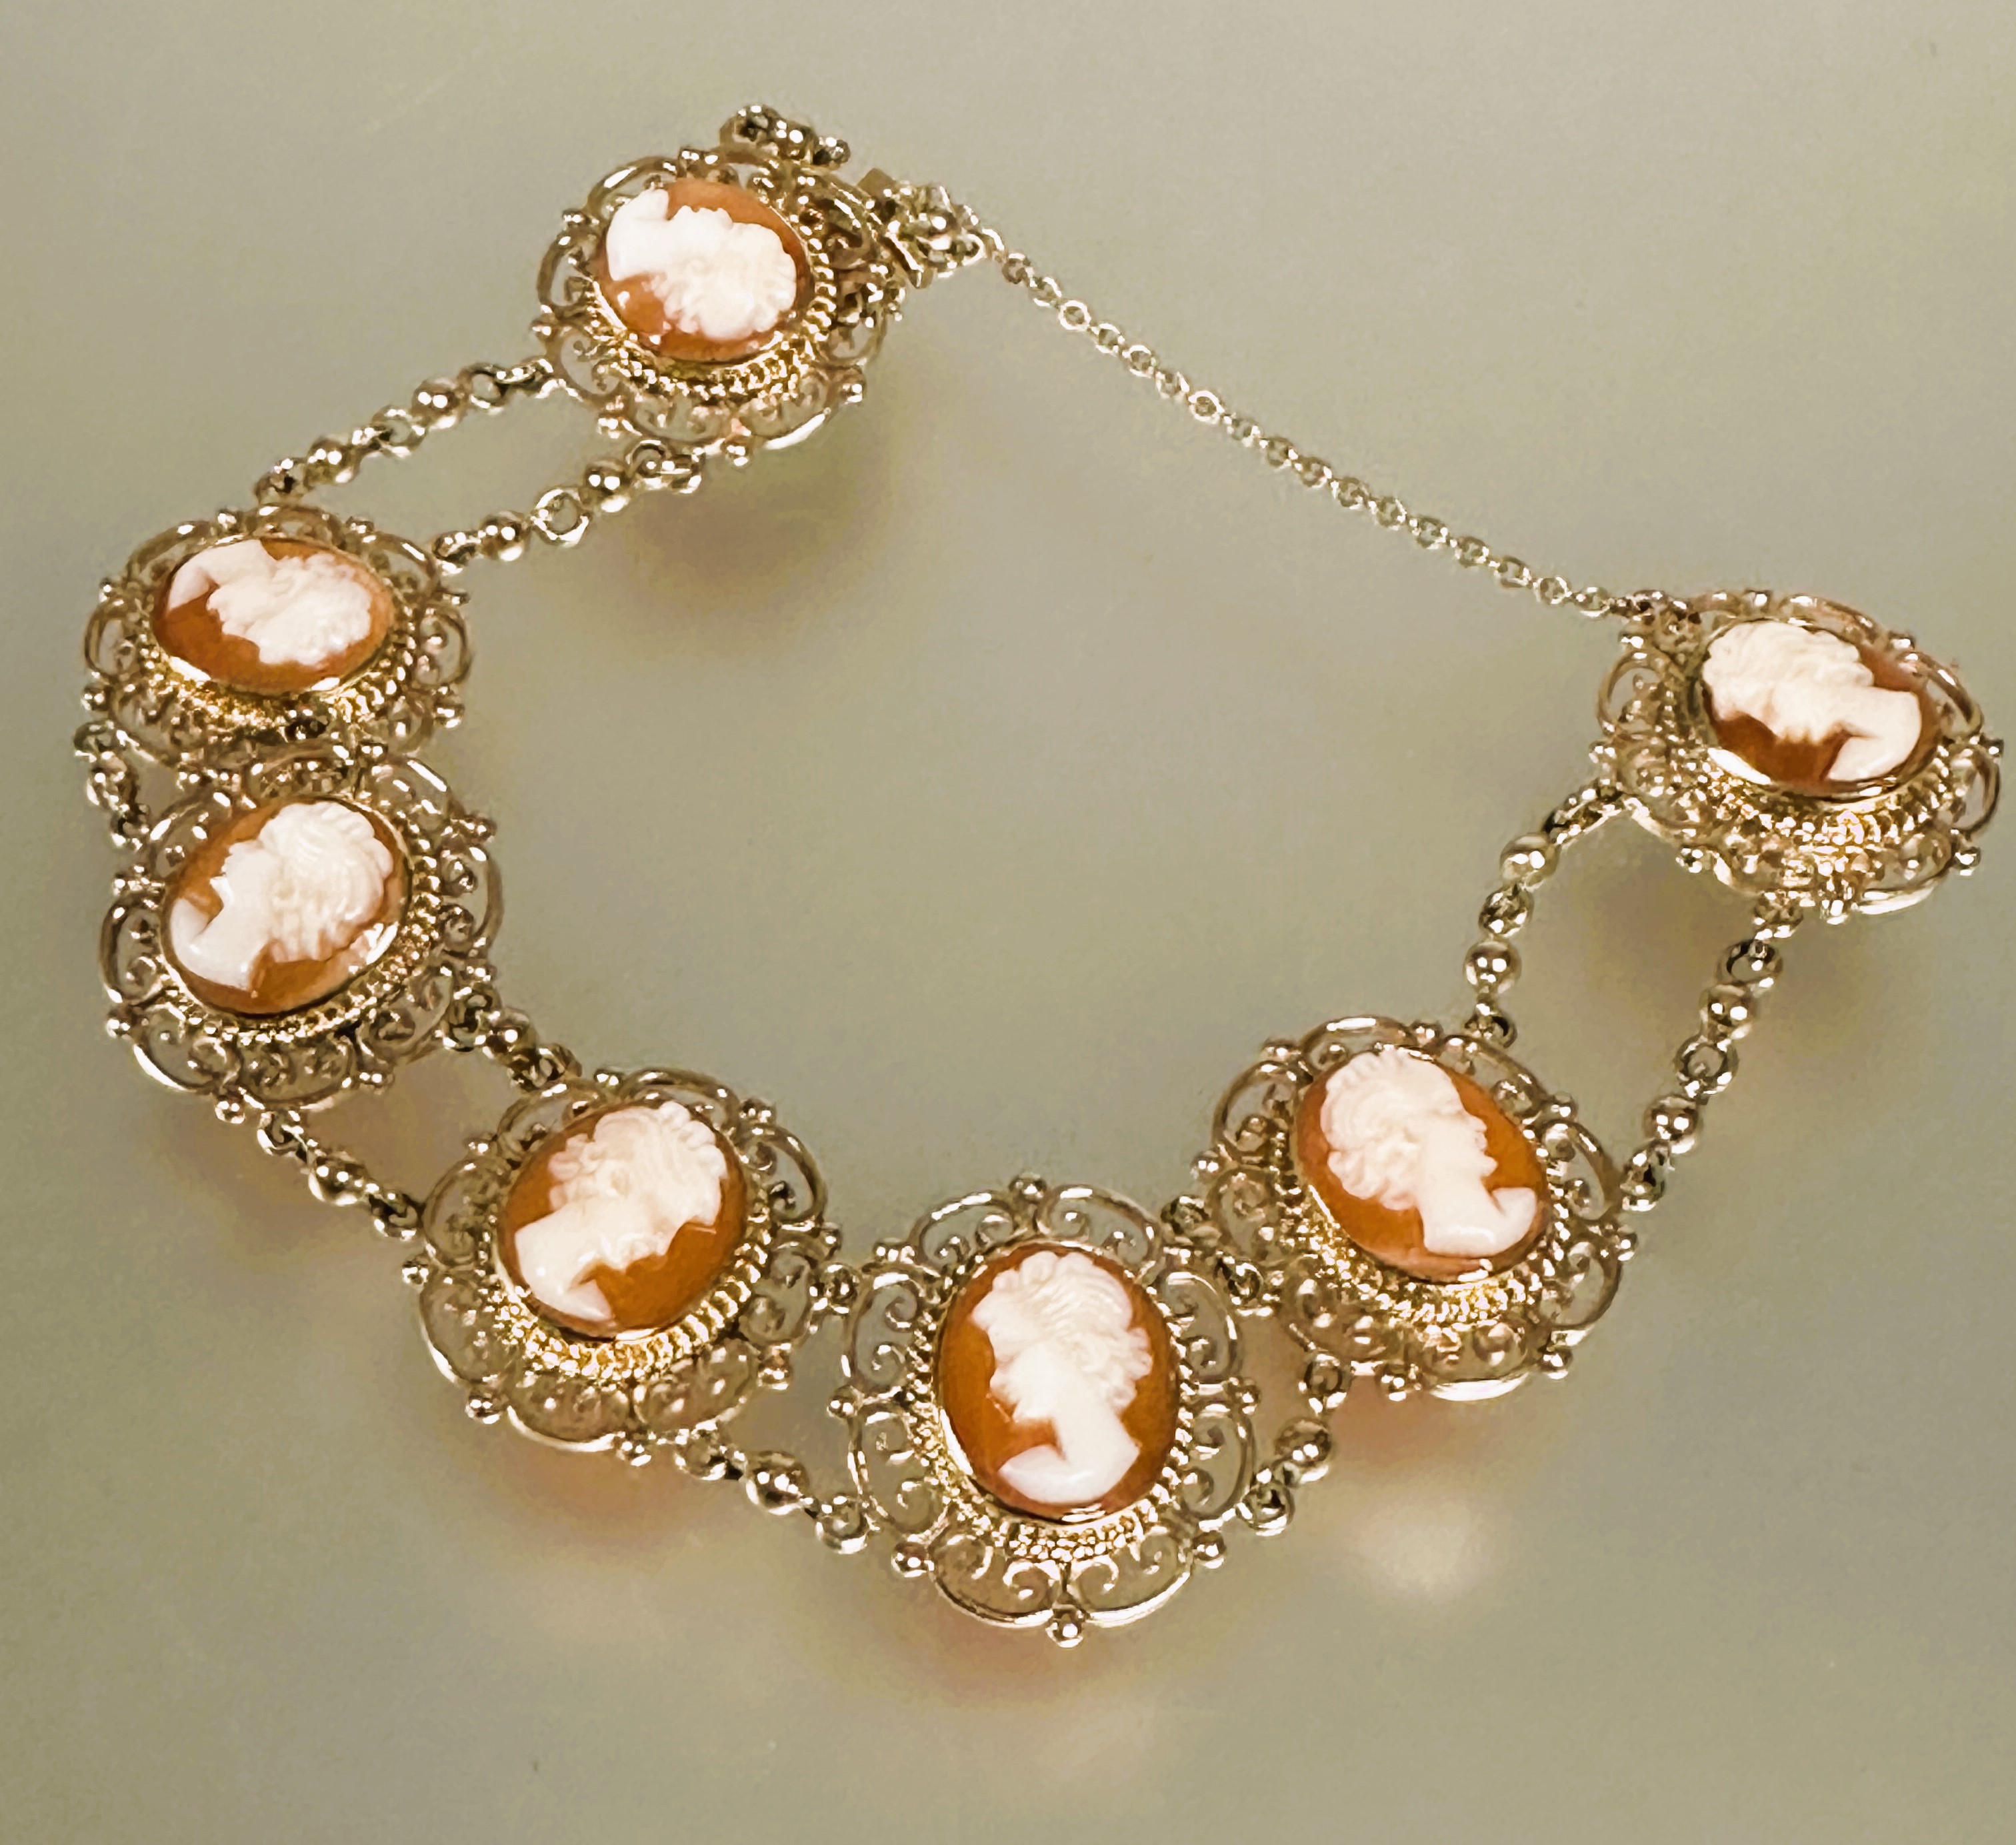 A 9ct gold bracelet set seven shell carved cameos in scrolling open work setting between chain